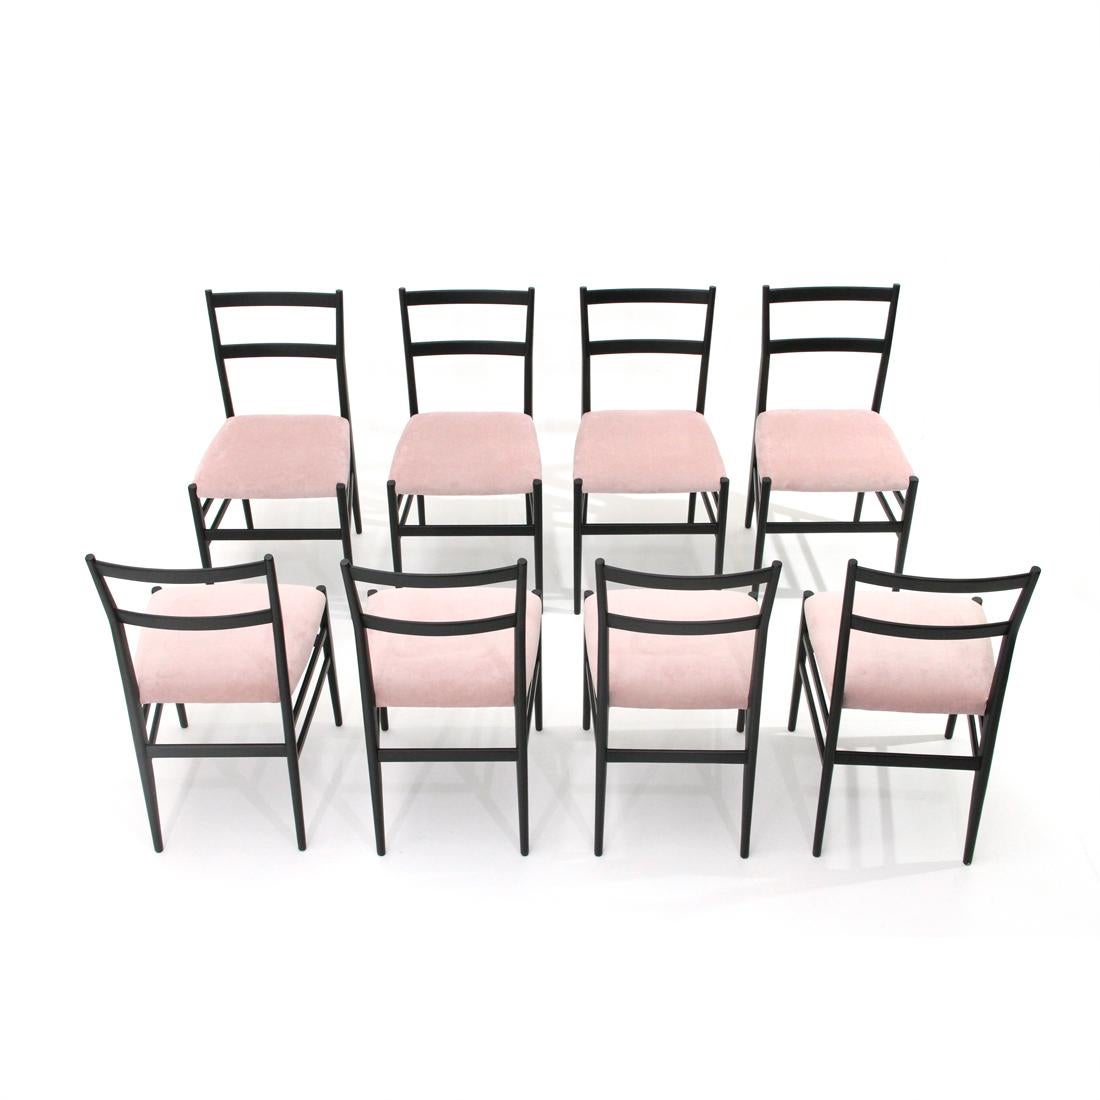 Mid-Century Modern Black and Pink ‘Leggera’ Chairs by Gio Ponti for Cassina, 1950s, Set of 8